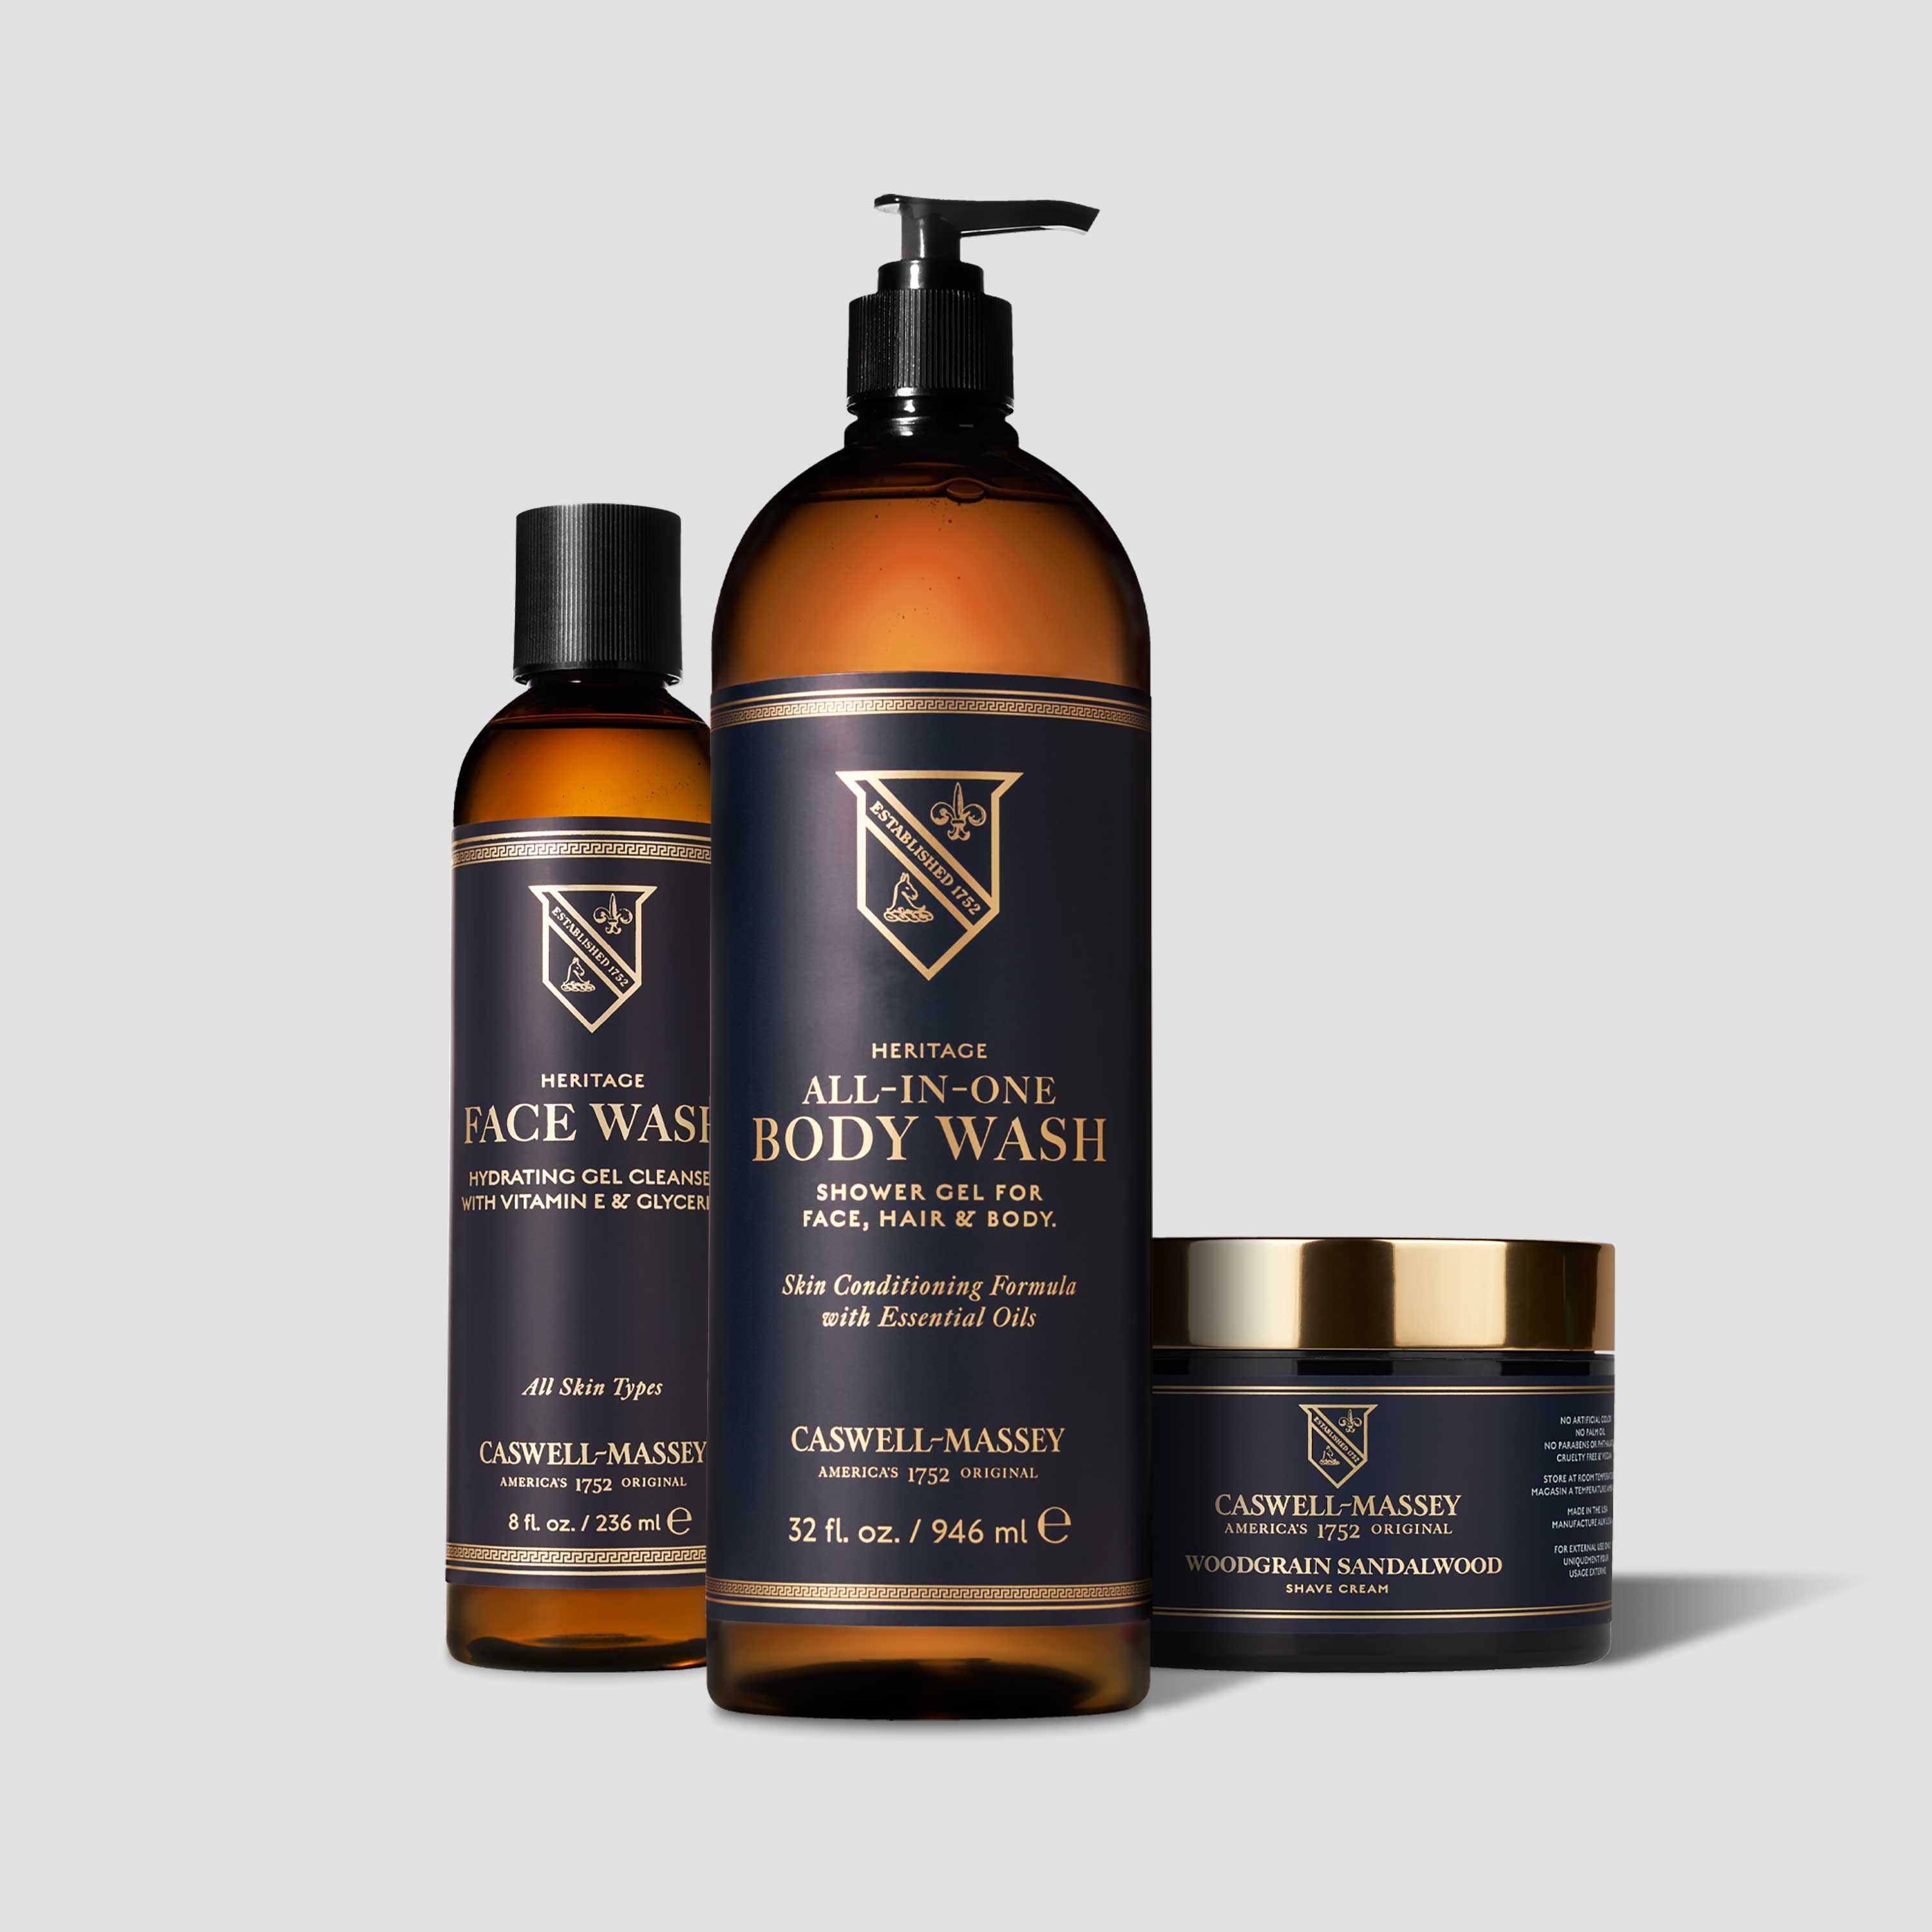 Caswell-Massey All-in-One Body Wash, Heritage Face Wash, and Woodgrain Sandalwood Shave Cream